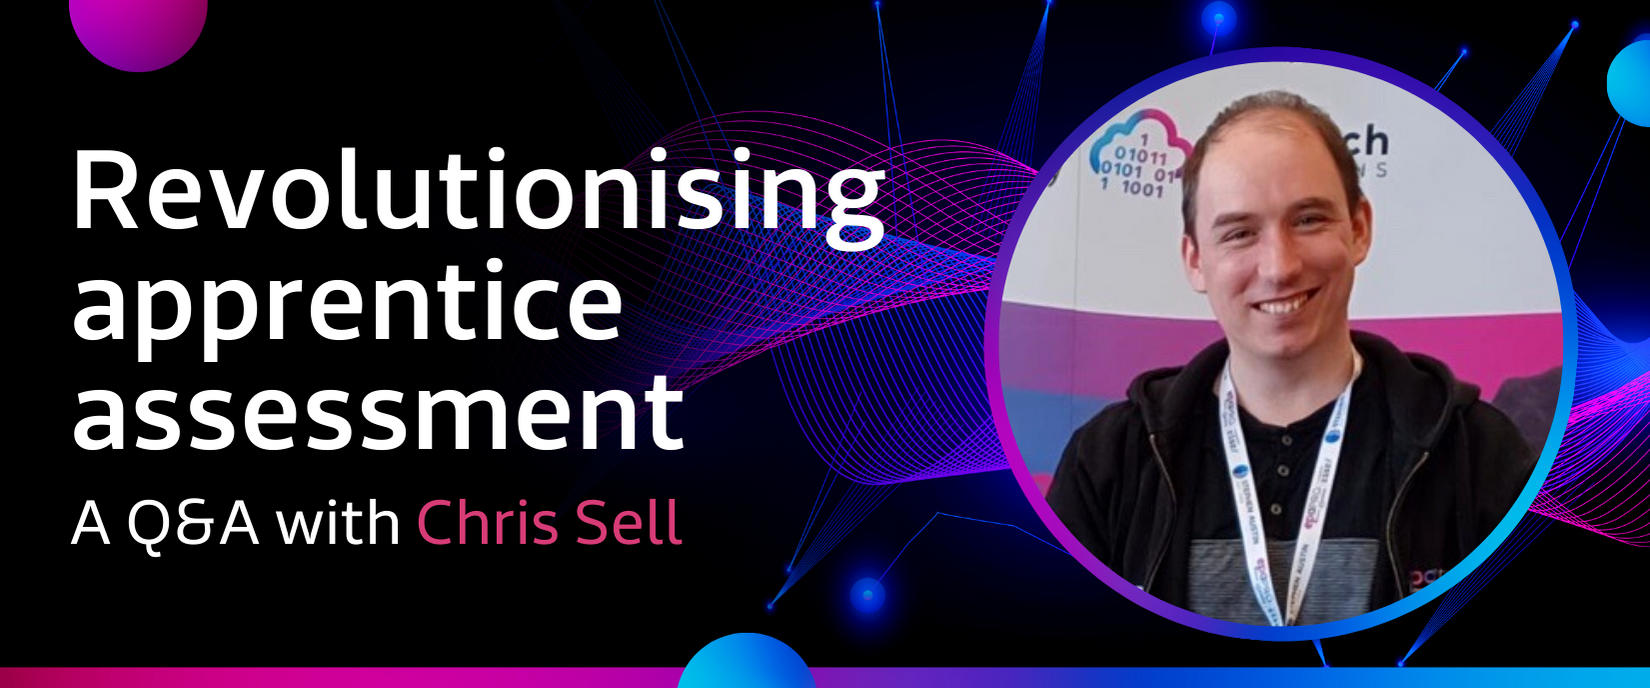 Revolutionising apprentice assessment: a Q&A with Chris Sell, Lead Developer at Skilltech Solutions